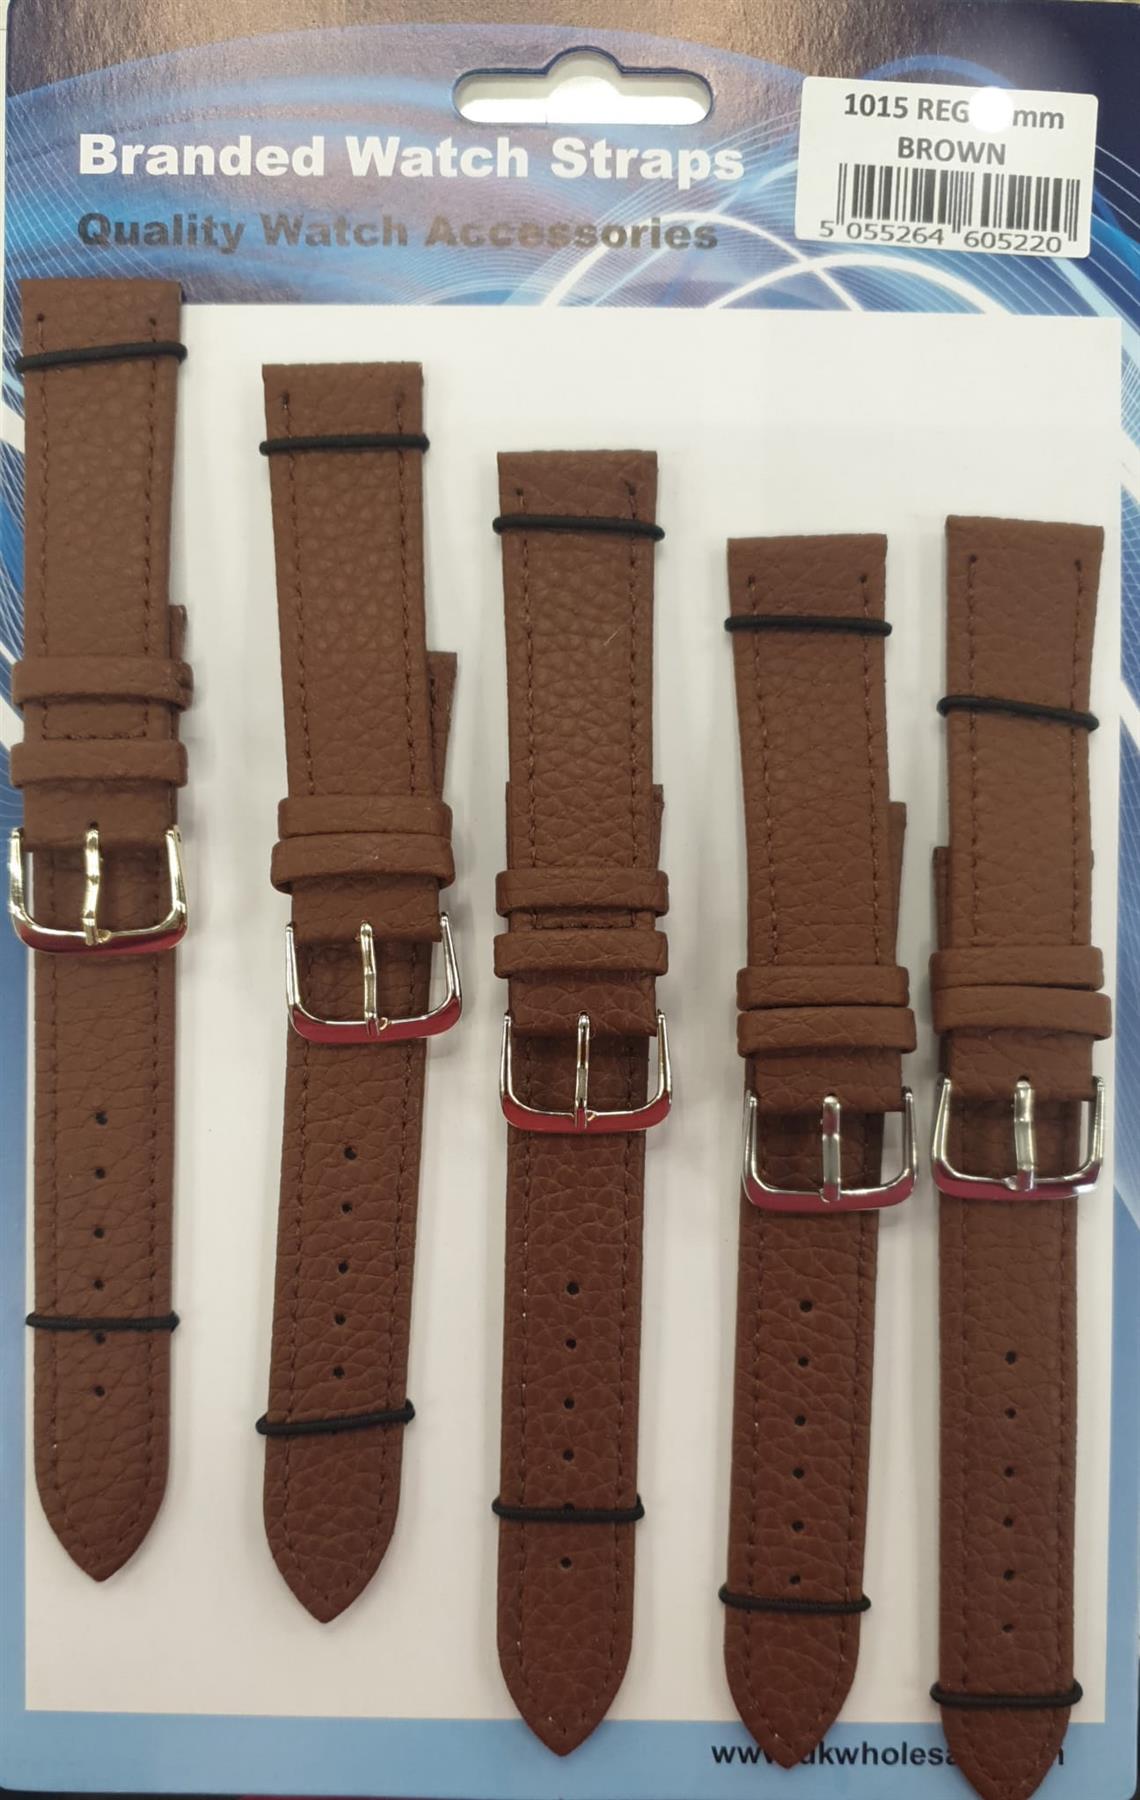 Brown Leather Watch Straps Pk5 size 22mm 1015BR